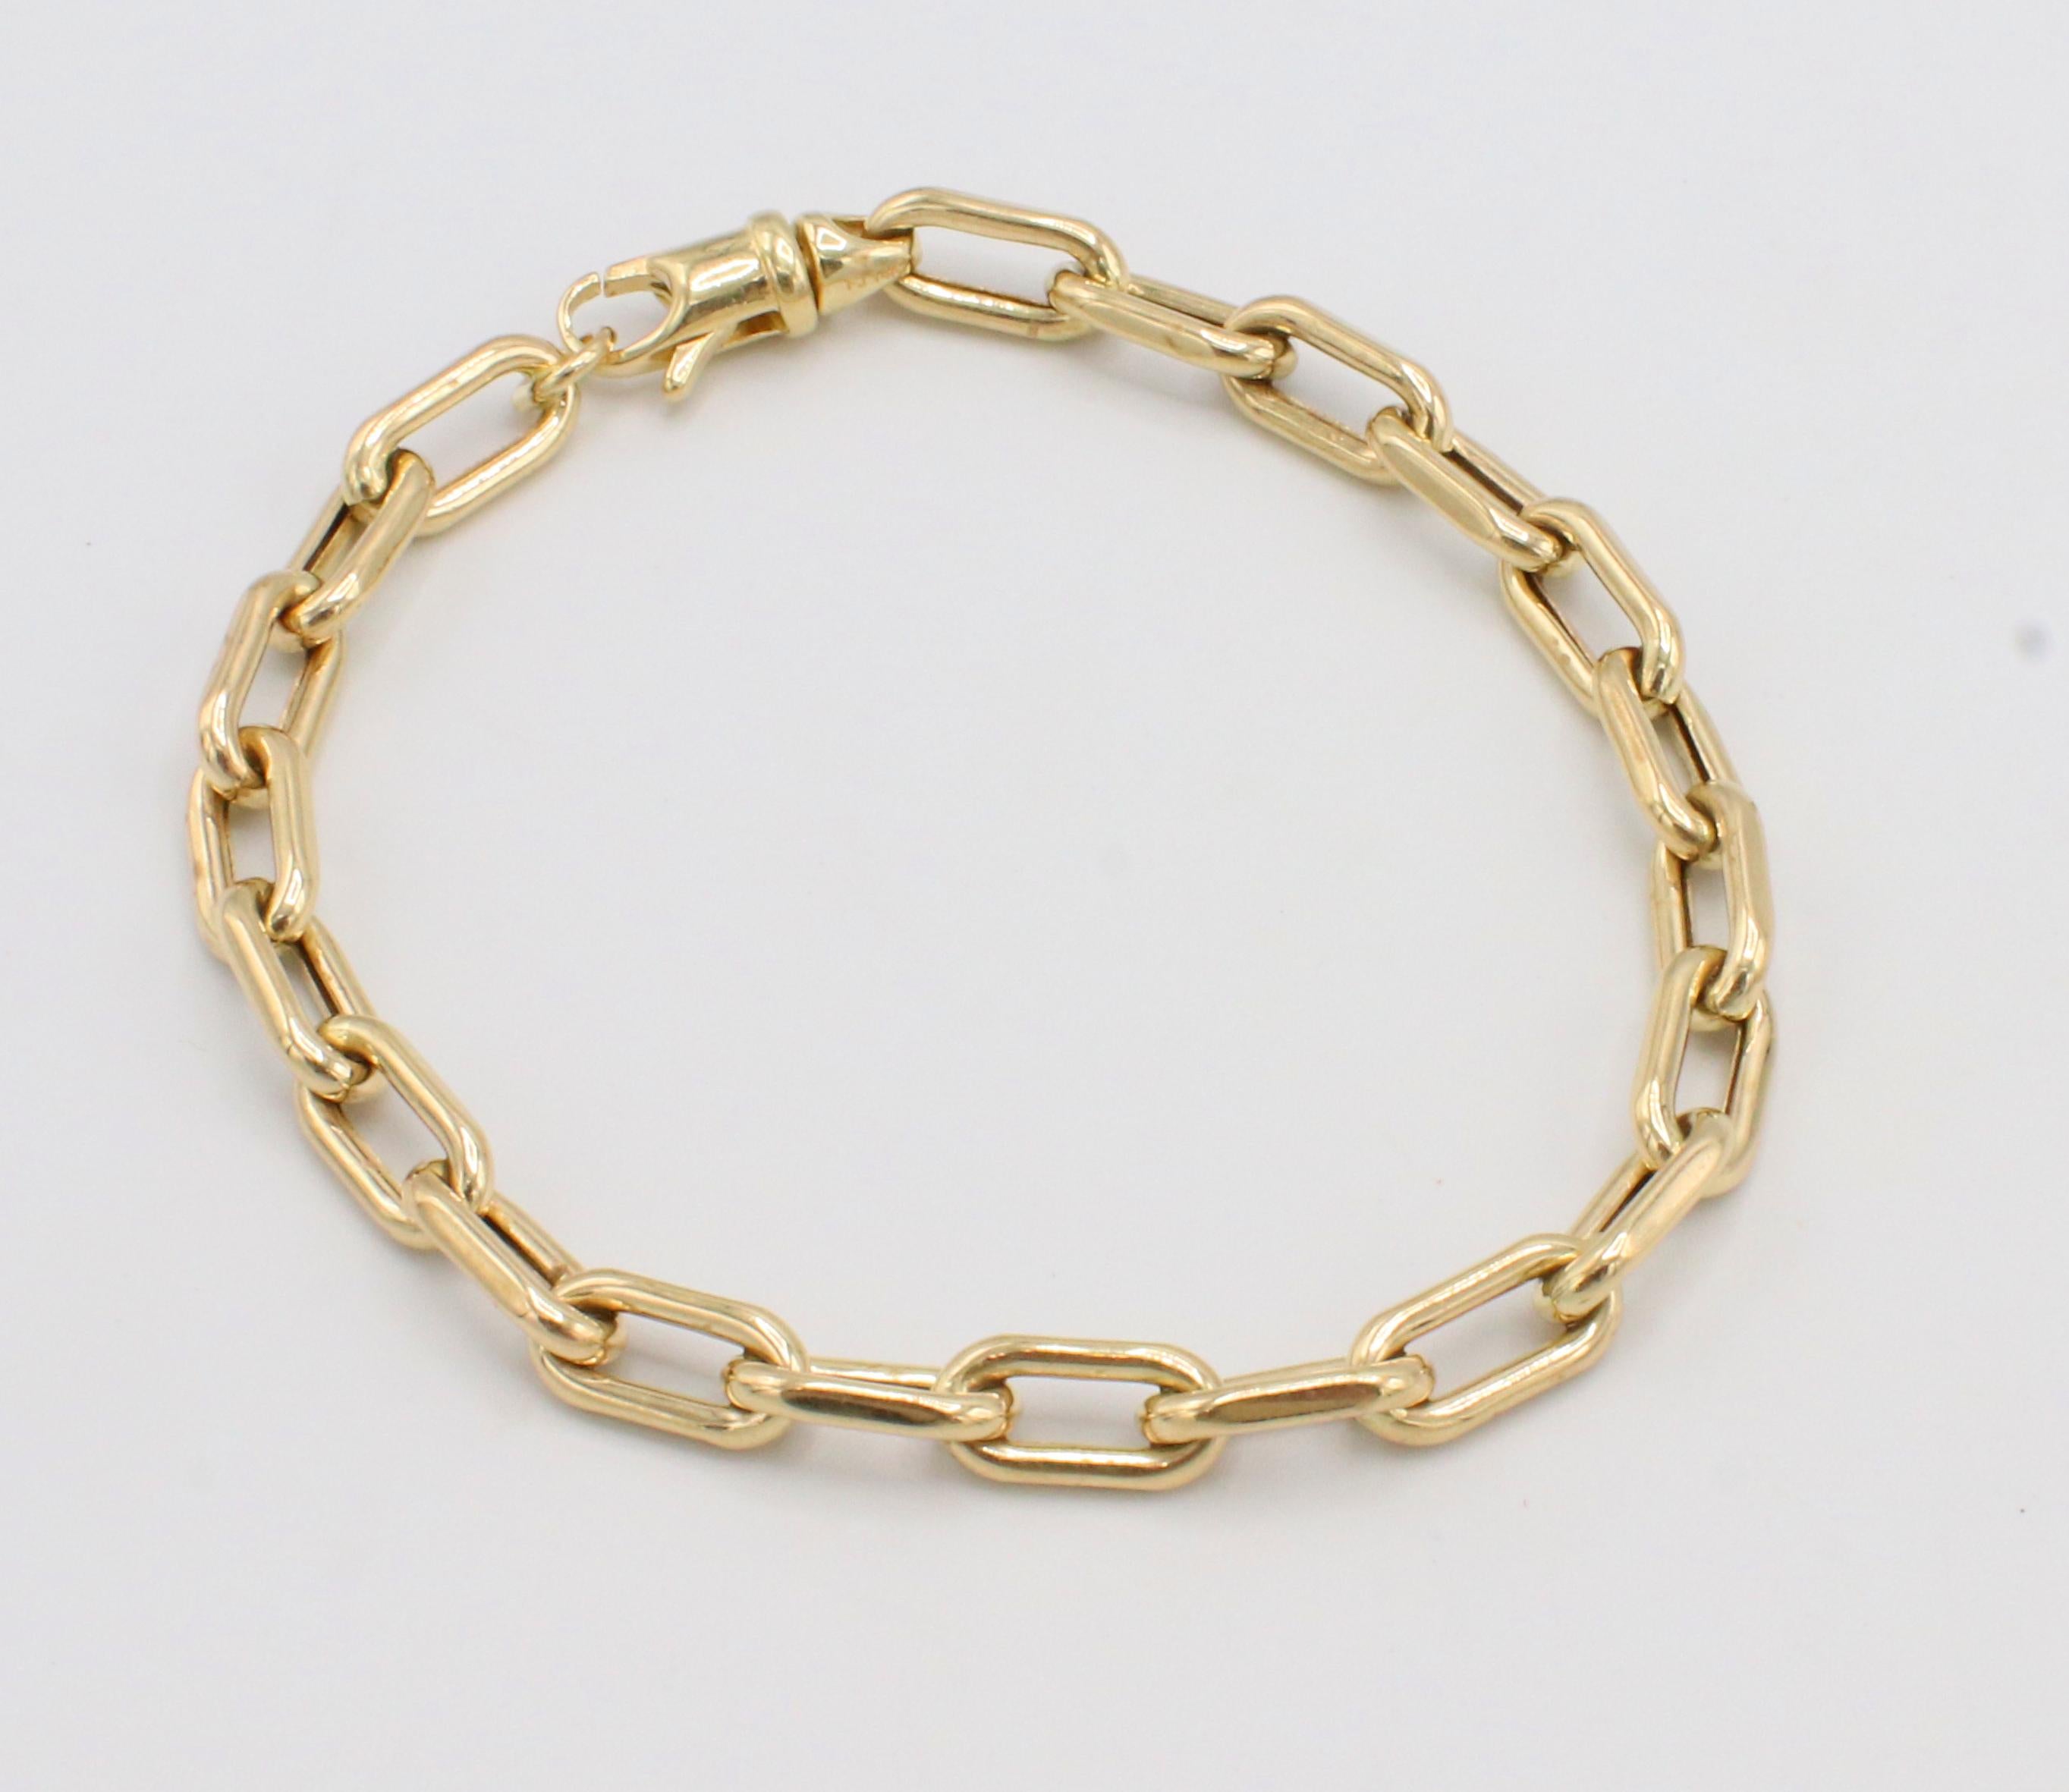 14 Karat Yellow Gold Paper Clip Chain Link Bracelet 
Metal: 14k yellow gold
Weight: 6.5 grams
Length: 7 inches
Links: 11 x 5.3mm
